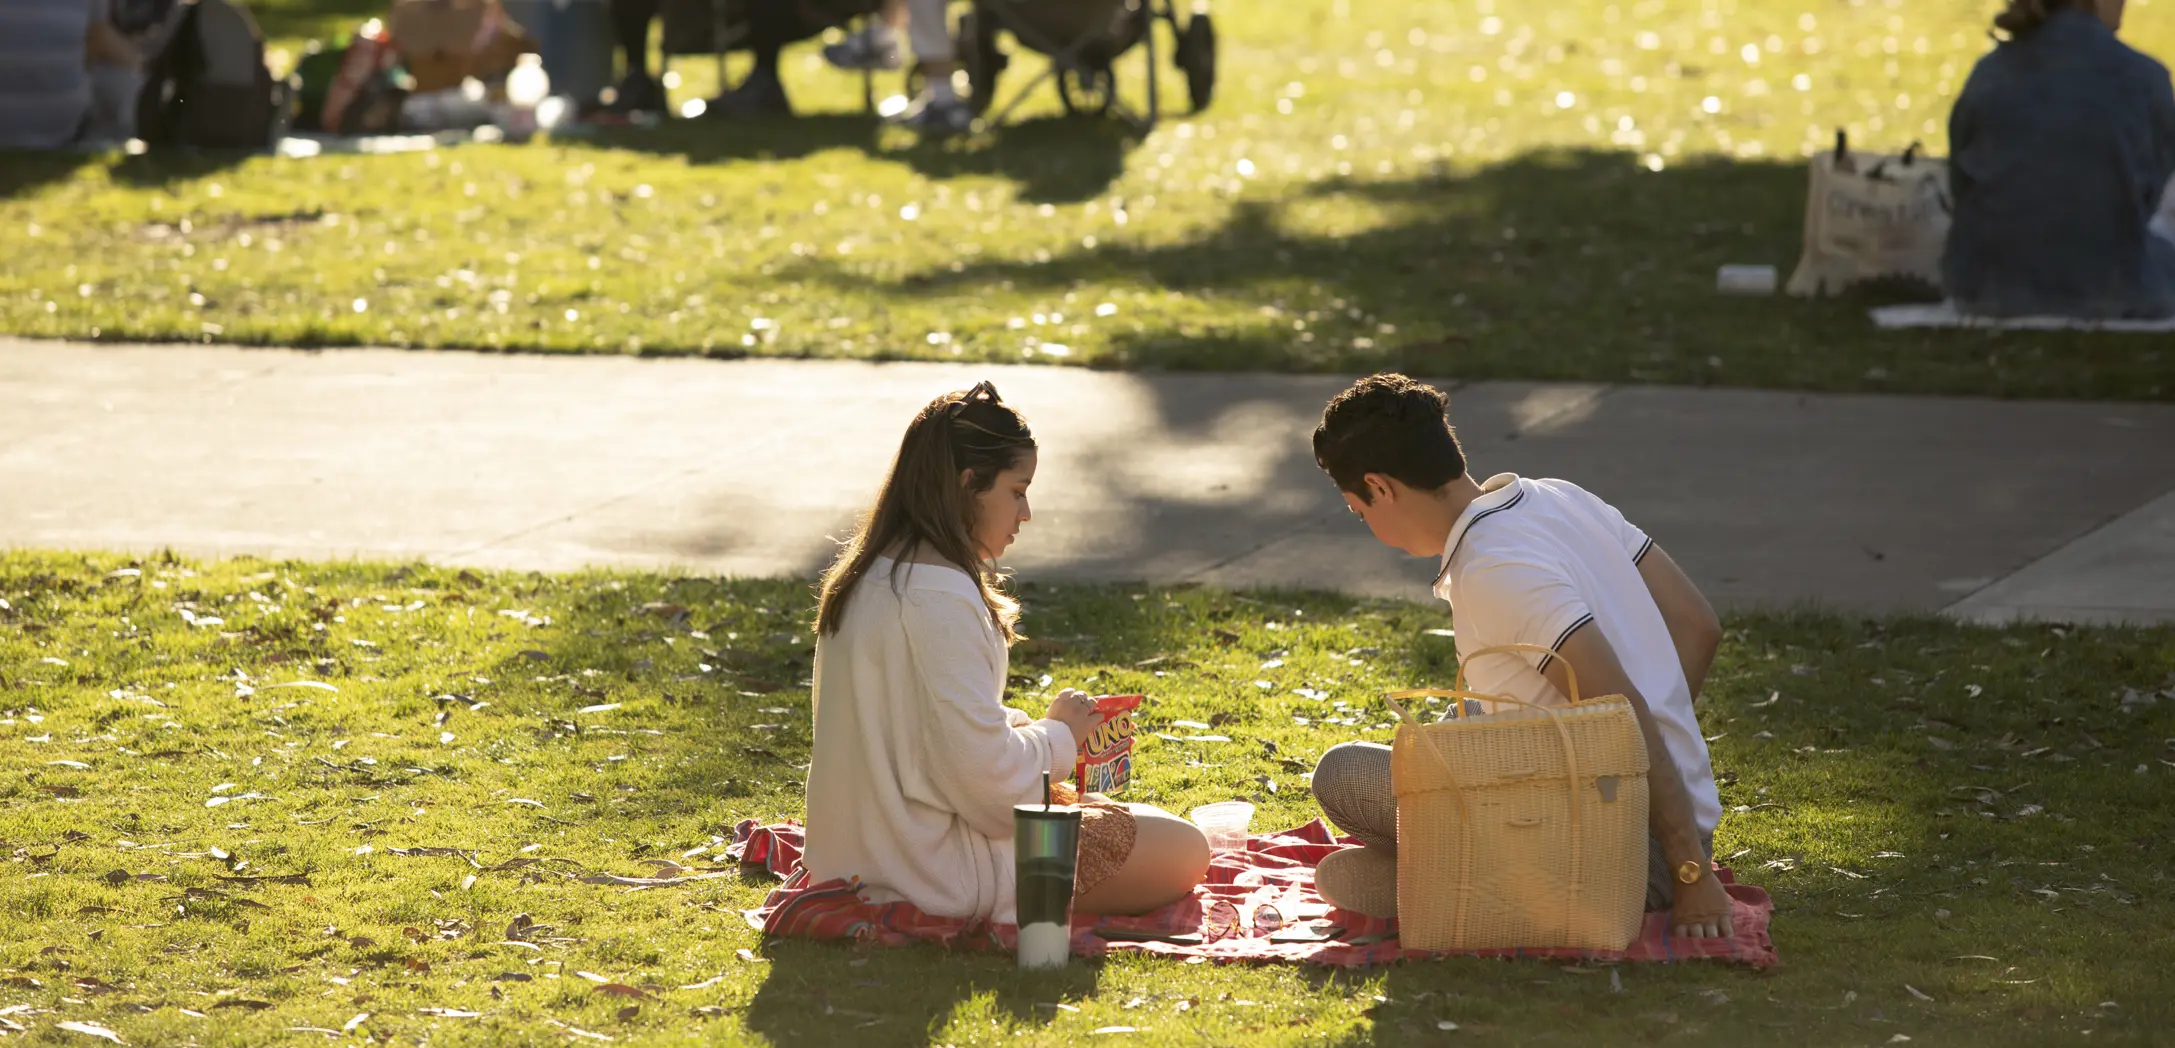 Two young adults sitting on a red blanket outdoors playing the card game Uno.